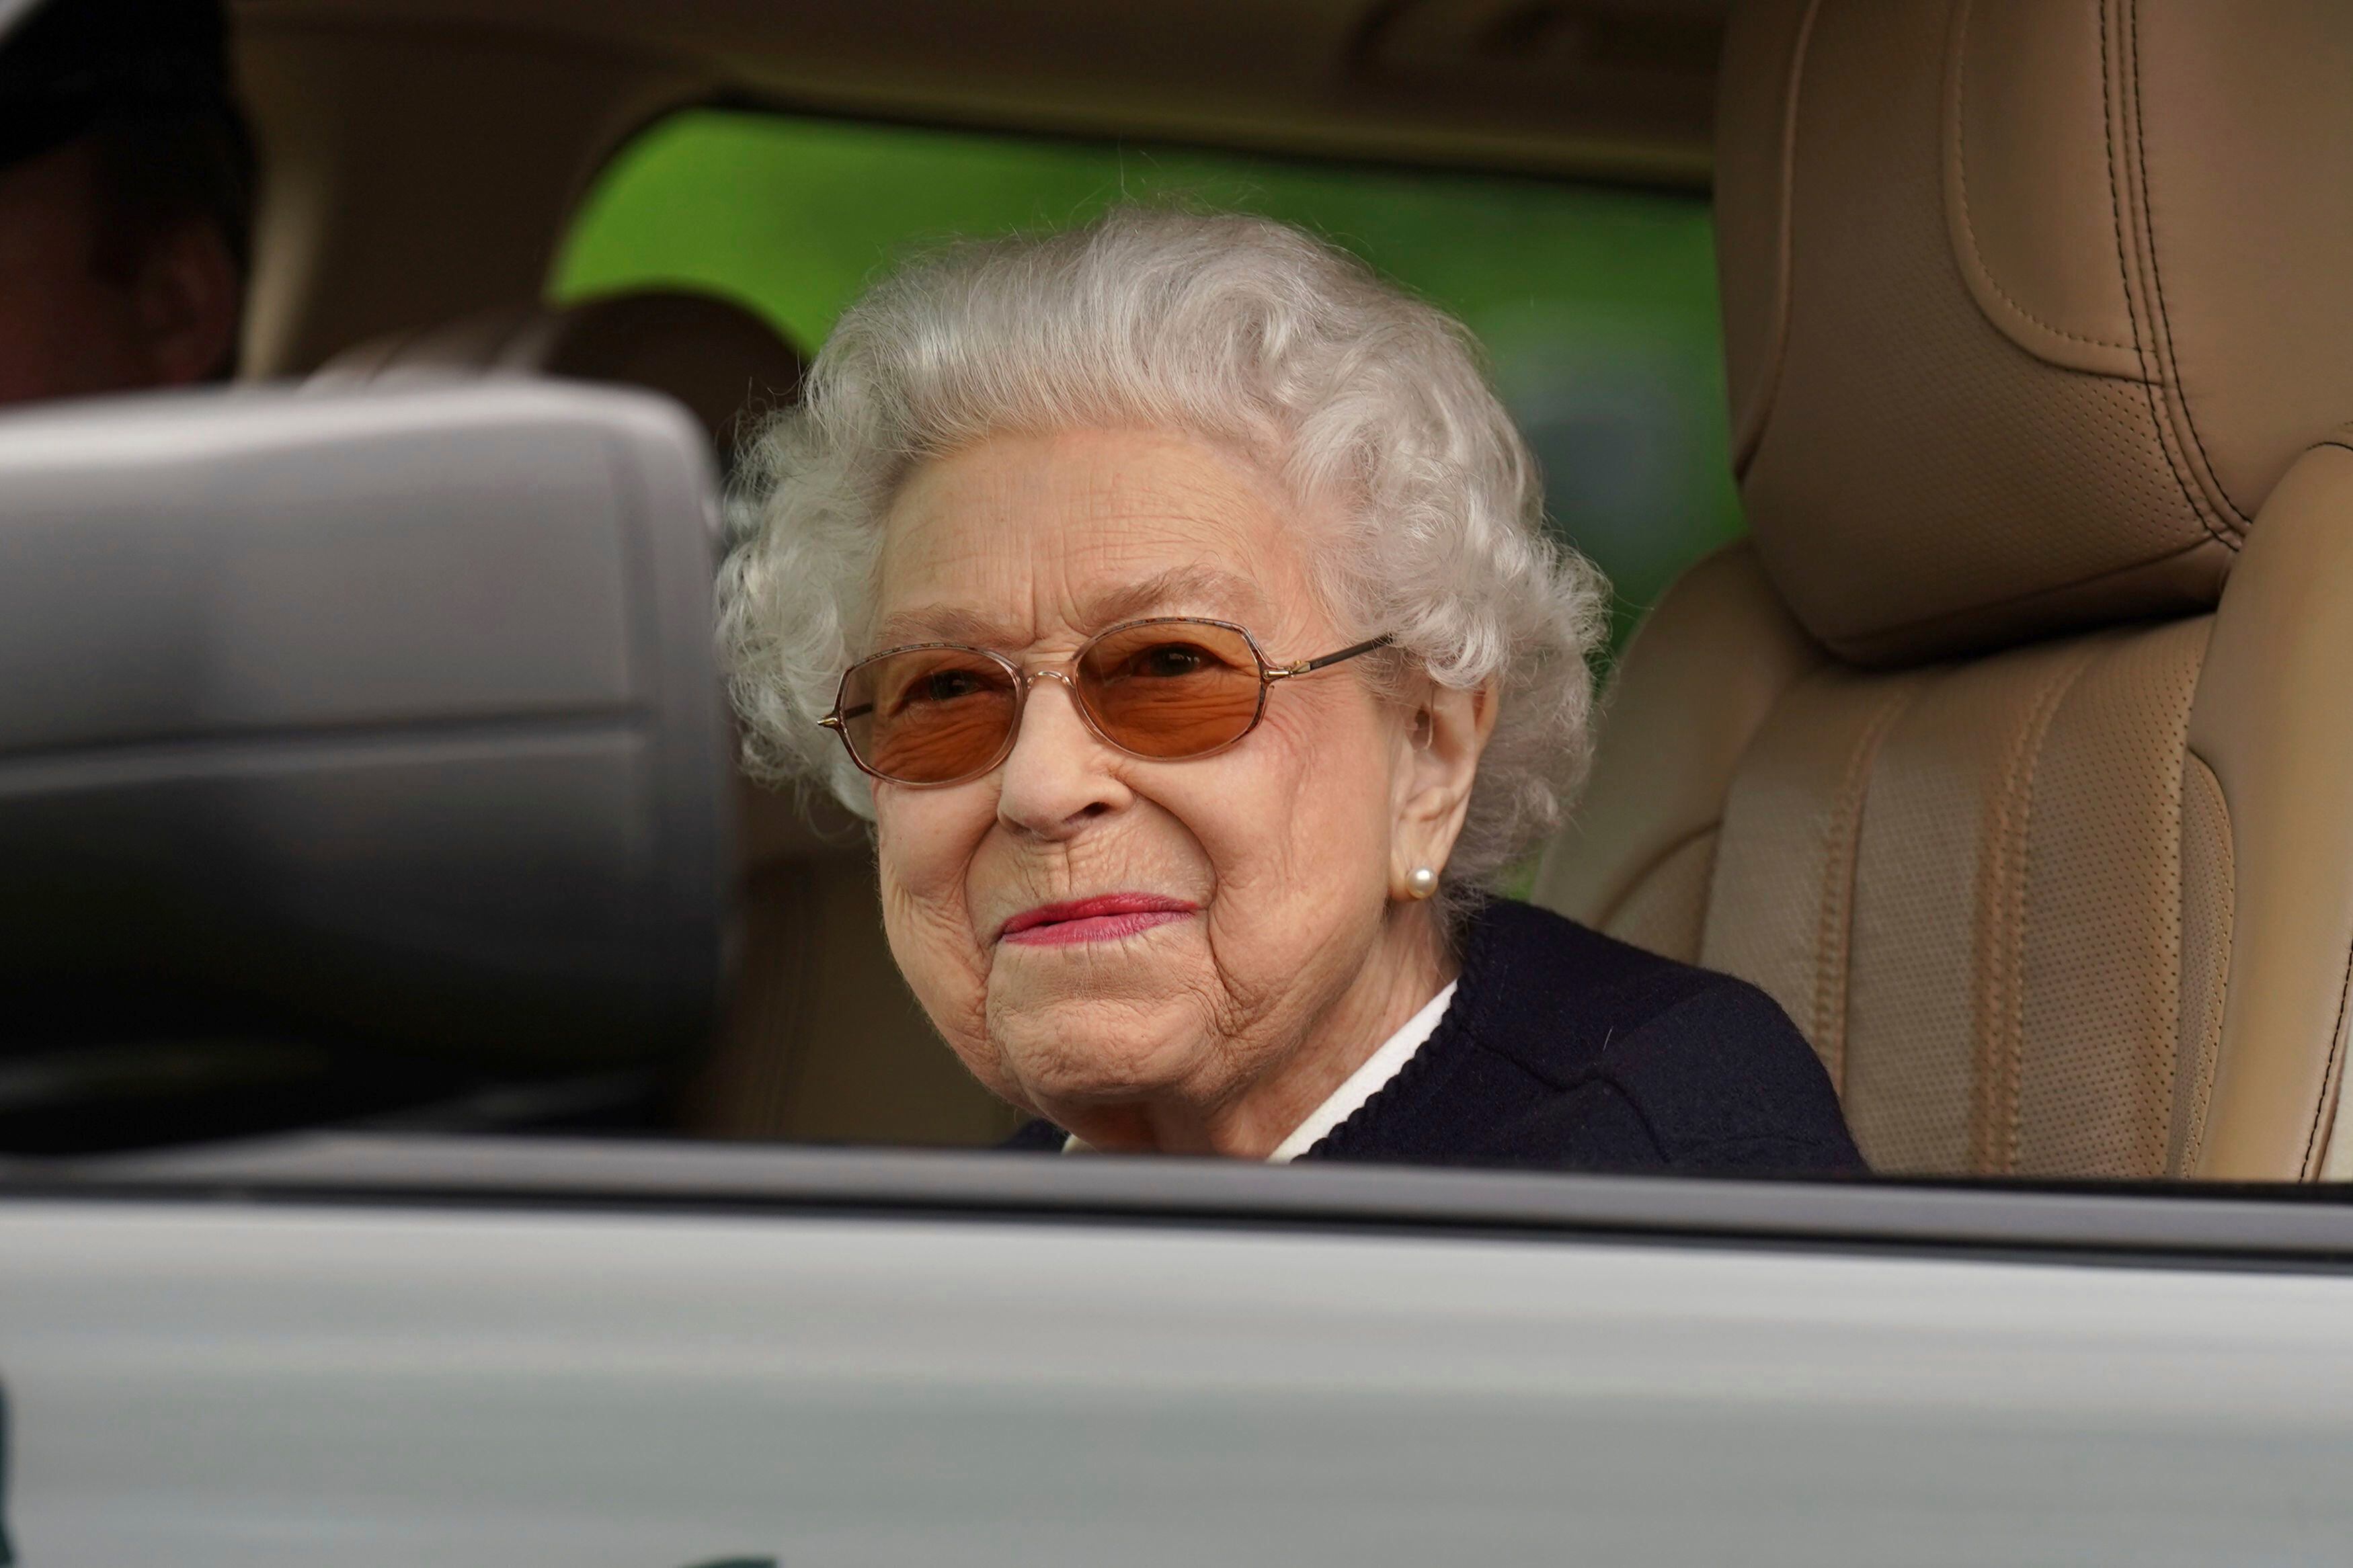 Queen attends horse show in first public appearance in weeks